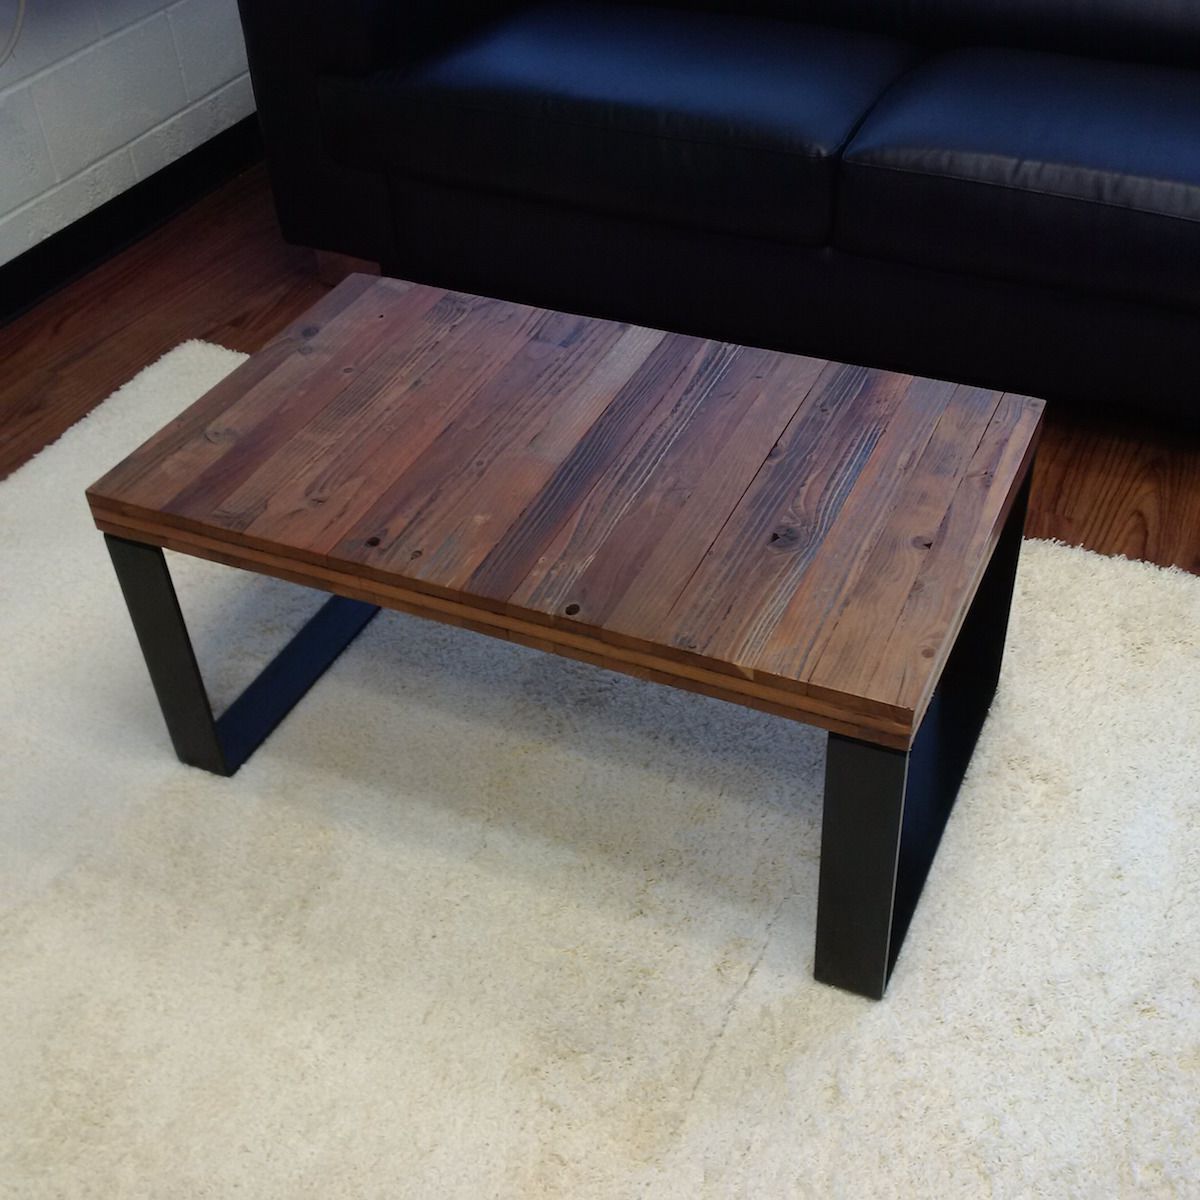 Famous Buy Custom Reclaimed Barn Wood Coffee Table, Made To Order From Sweet Throughout Coffee Tables With Storage And Barn Doors (View 12 of 15)